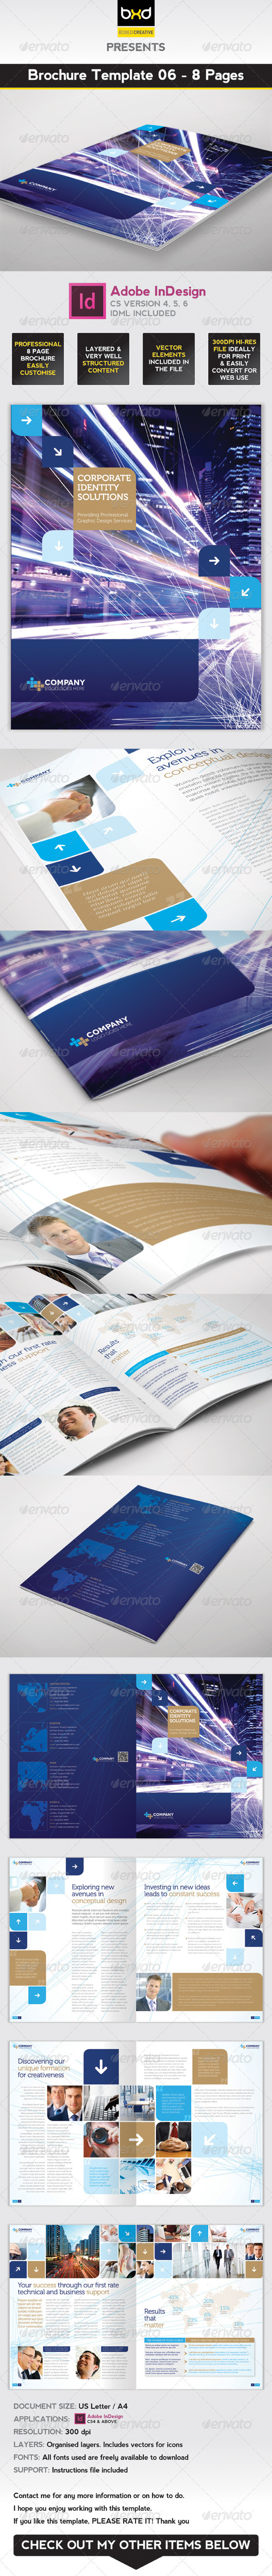 Brochure Template - InDesign 8 Page Layout 06